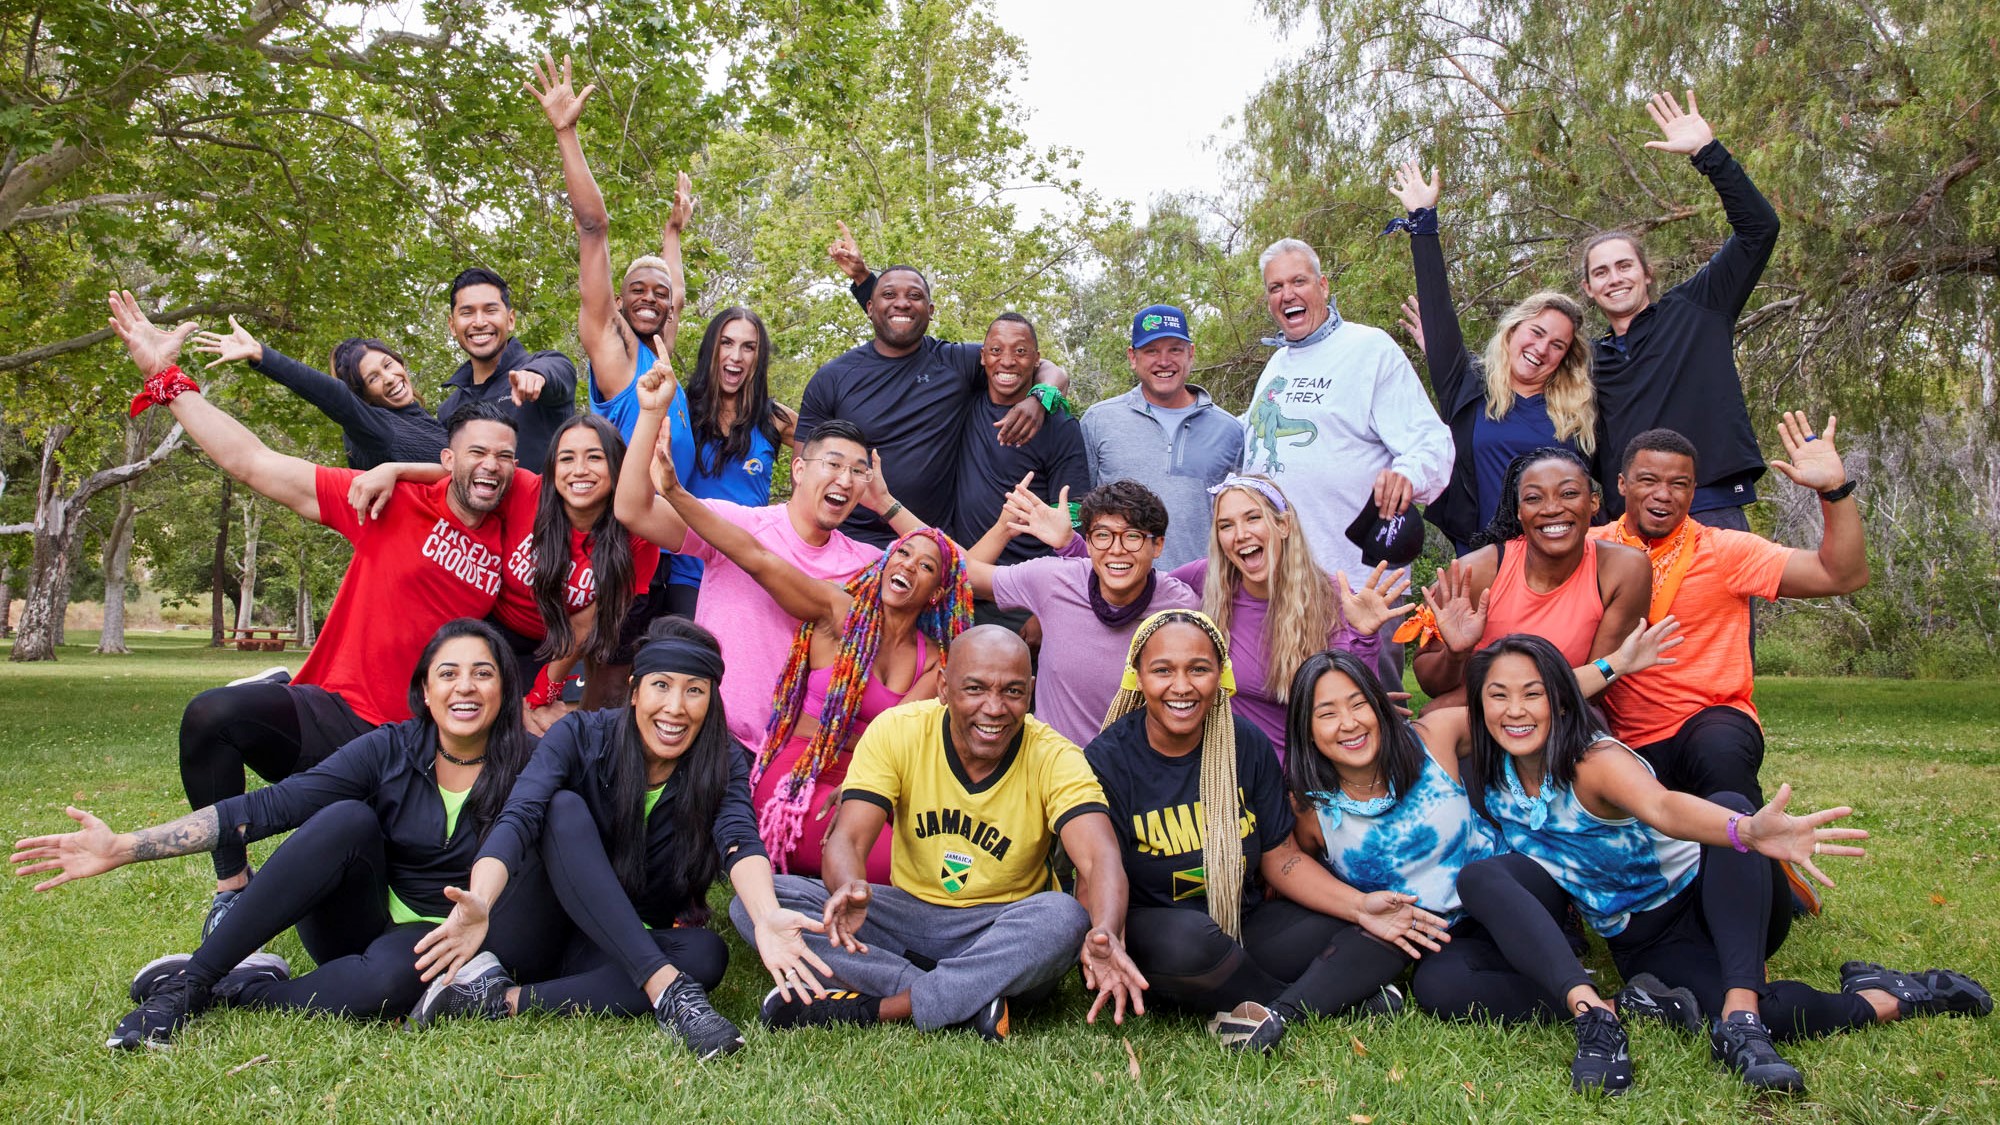 How to watch The Amazing Race season 34 online from anywhere all